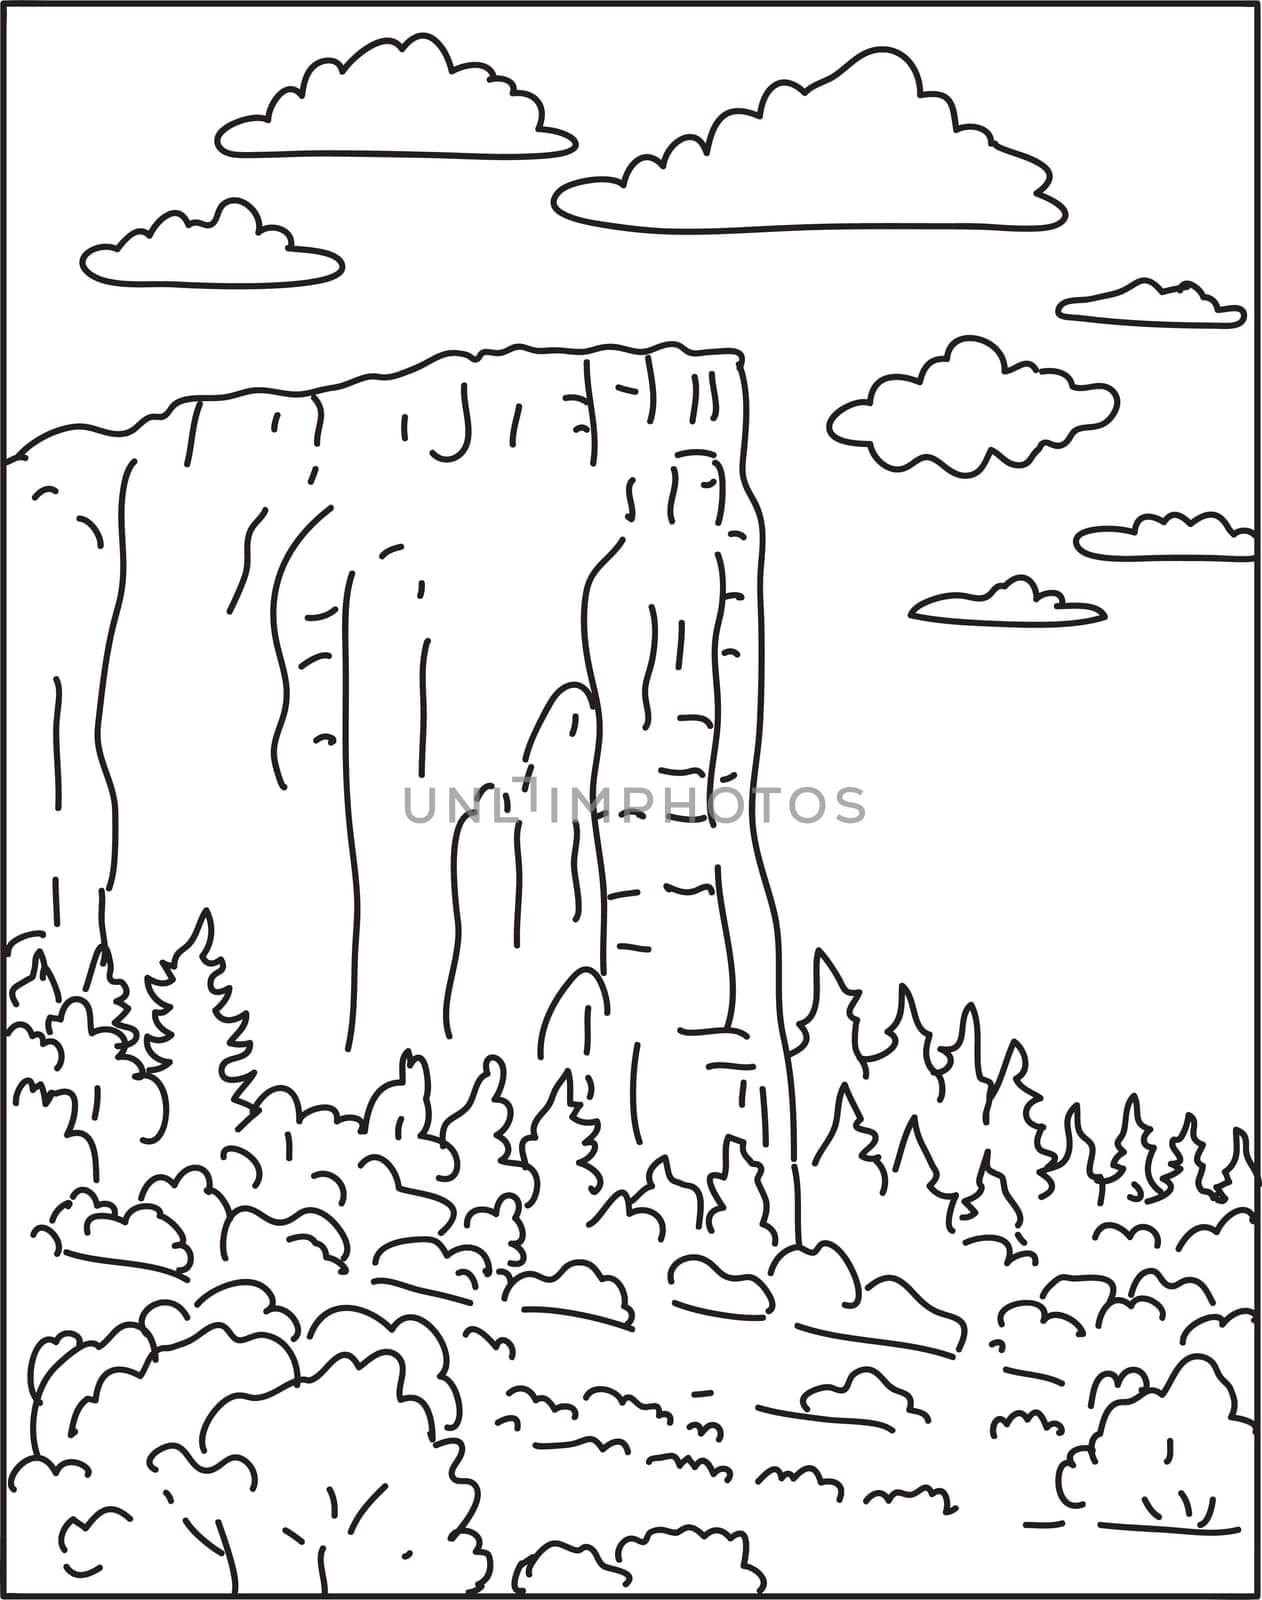 Mono line illustration of El Morro National Monument in Cibola County, New Mexico, United States done in monoline line art style.